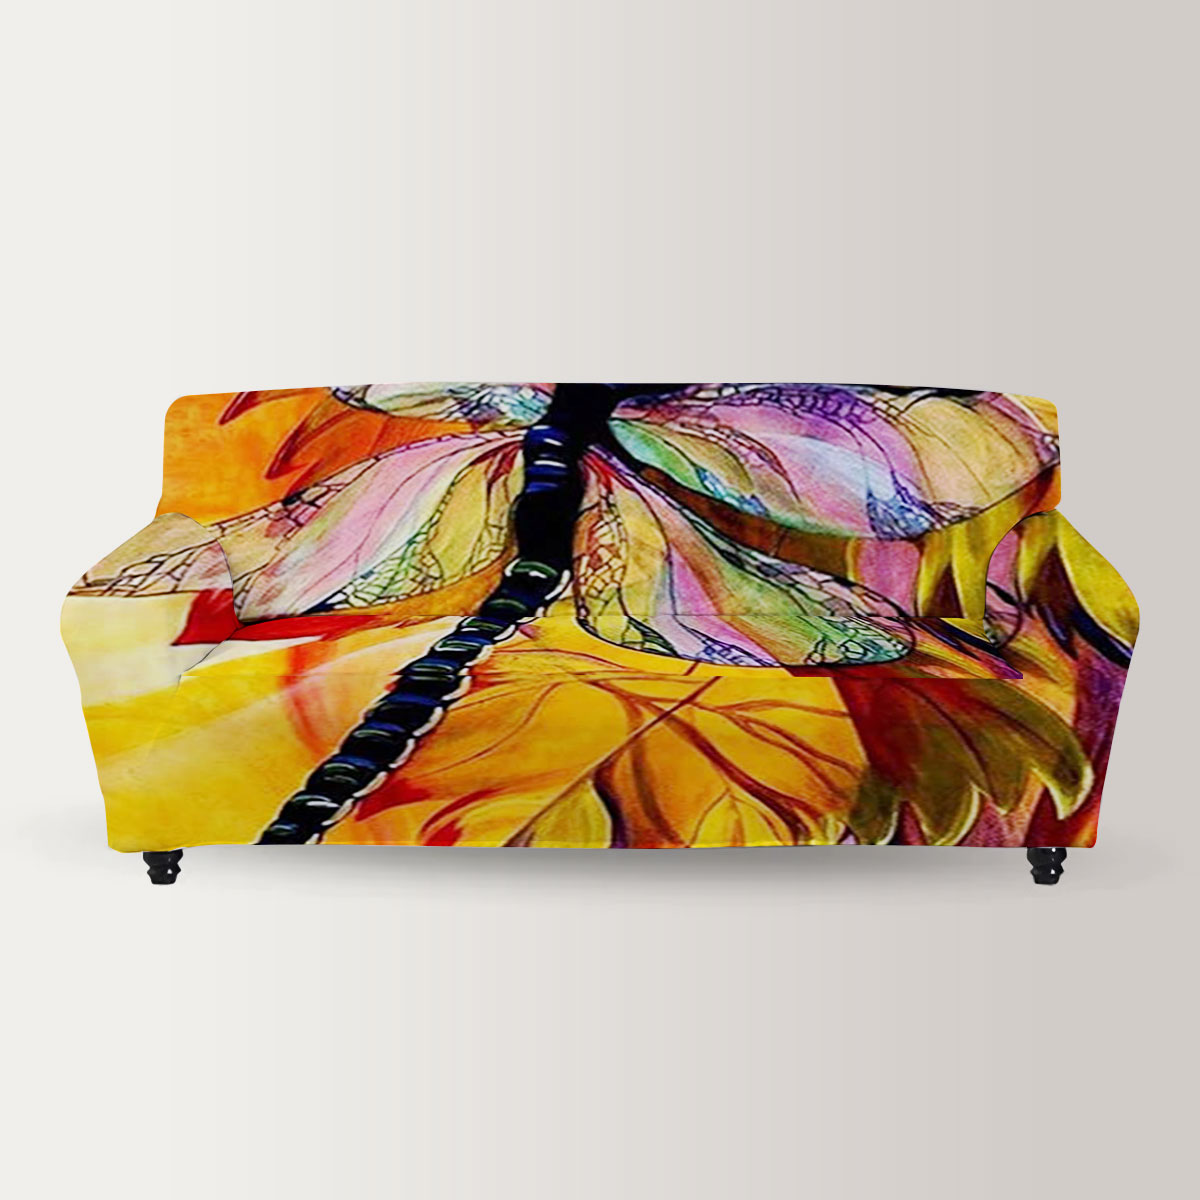 The Sunset Dragonfly Sofa Cover